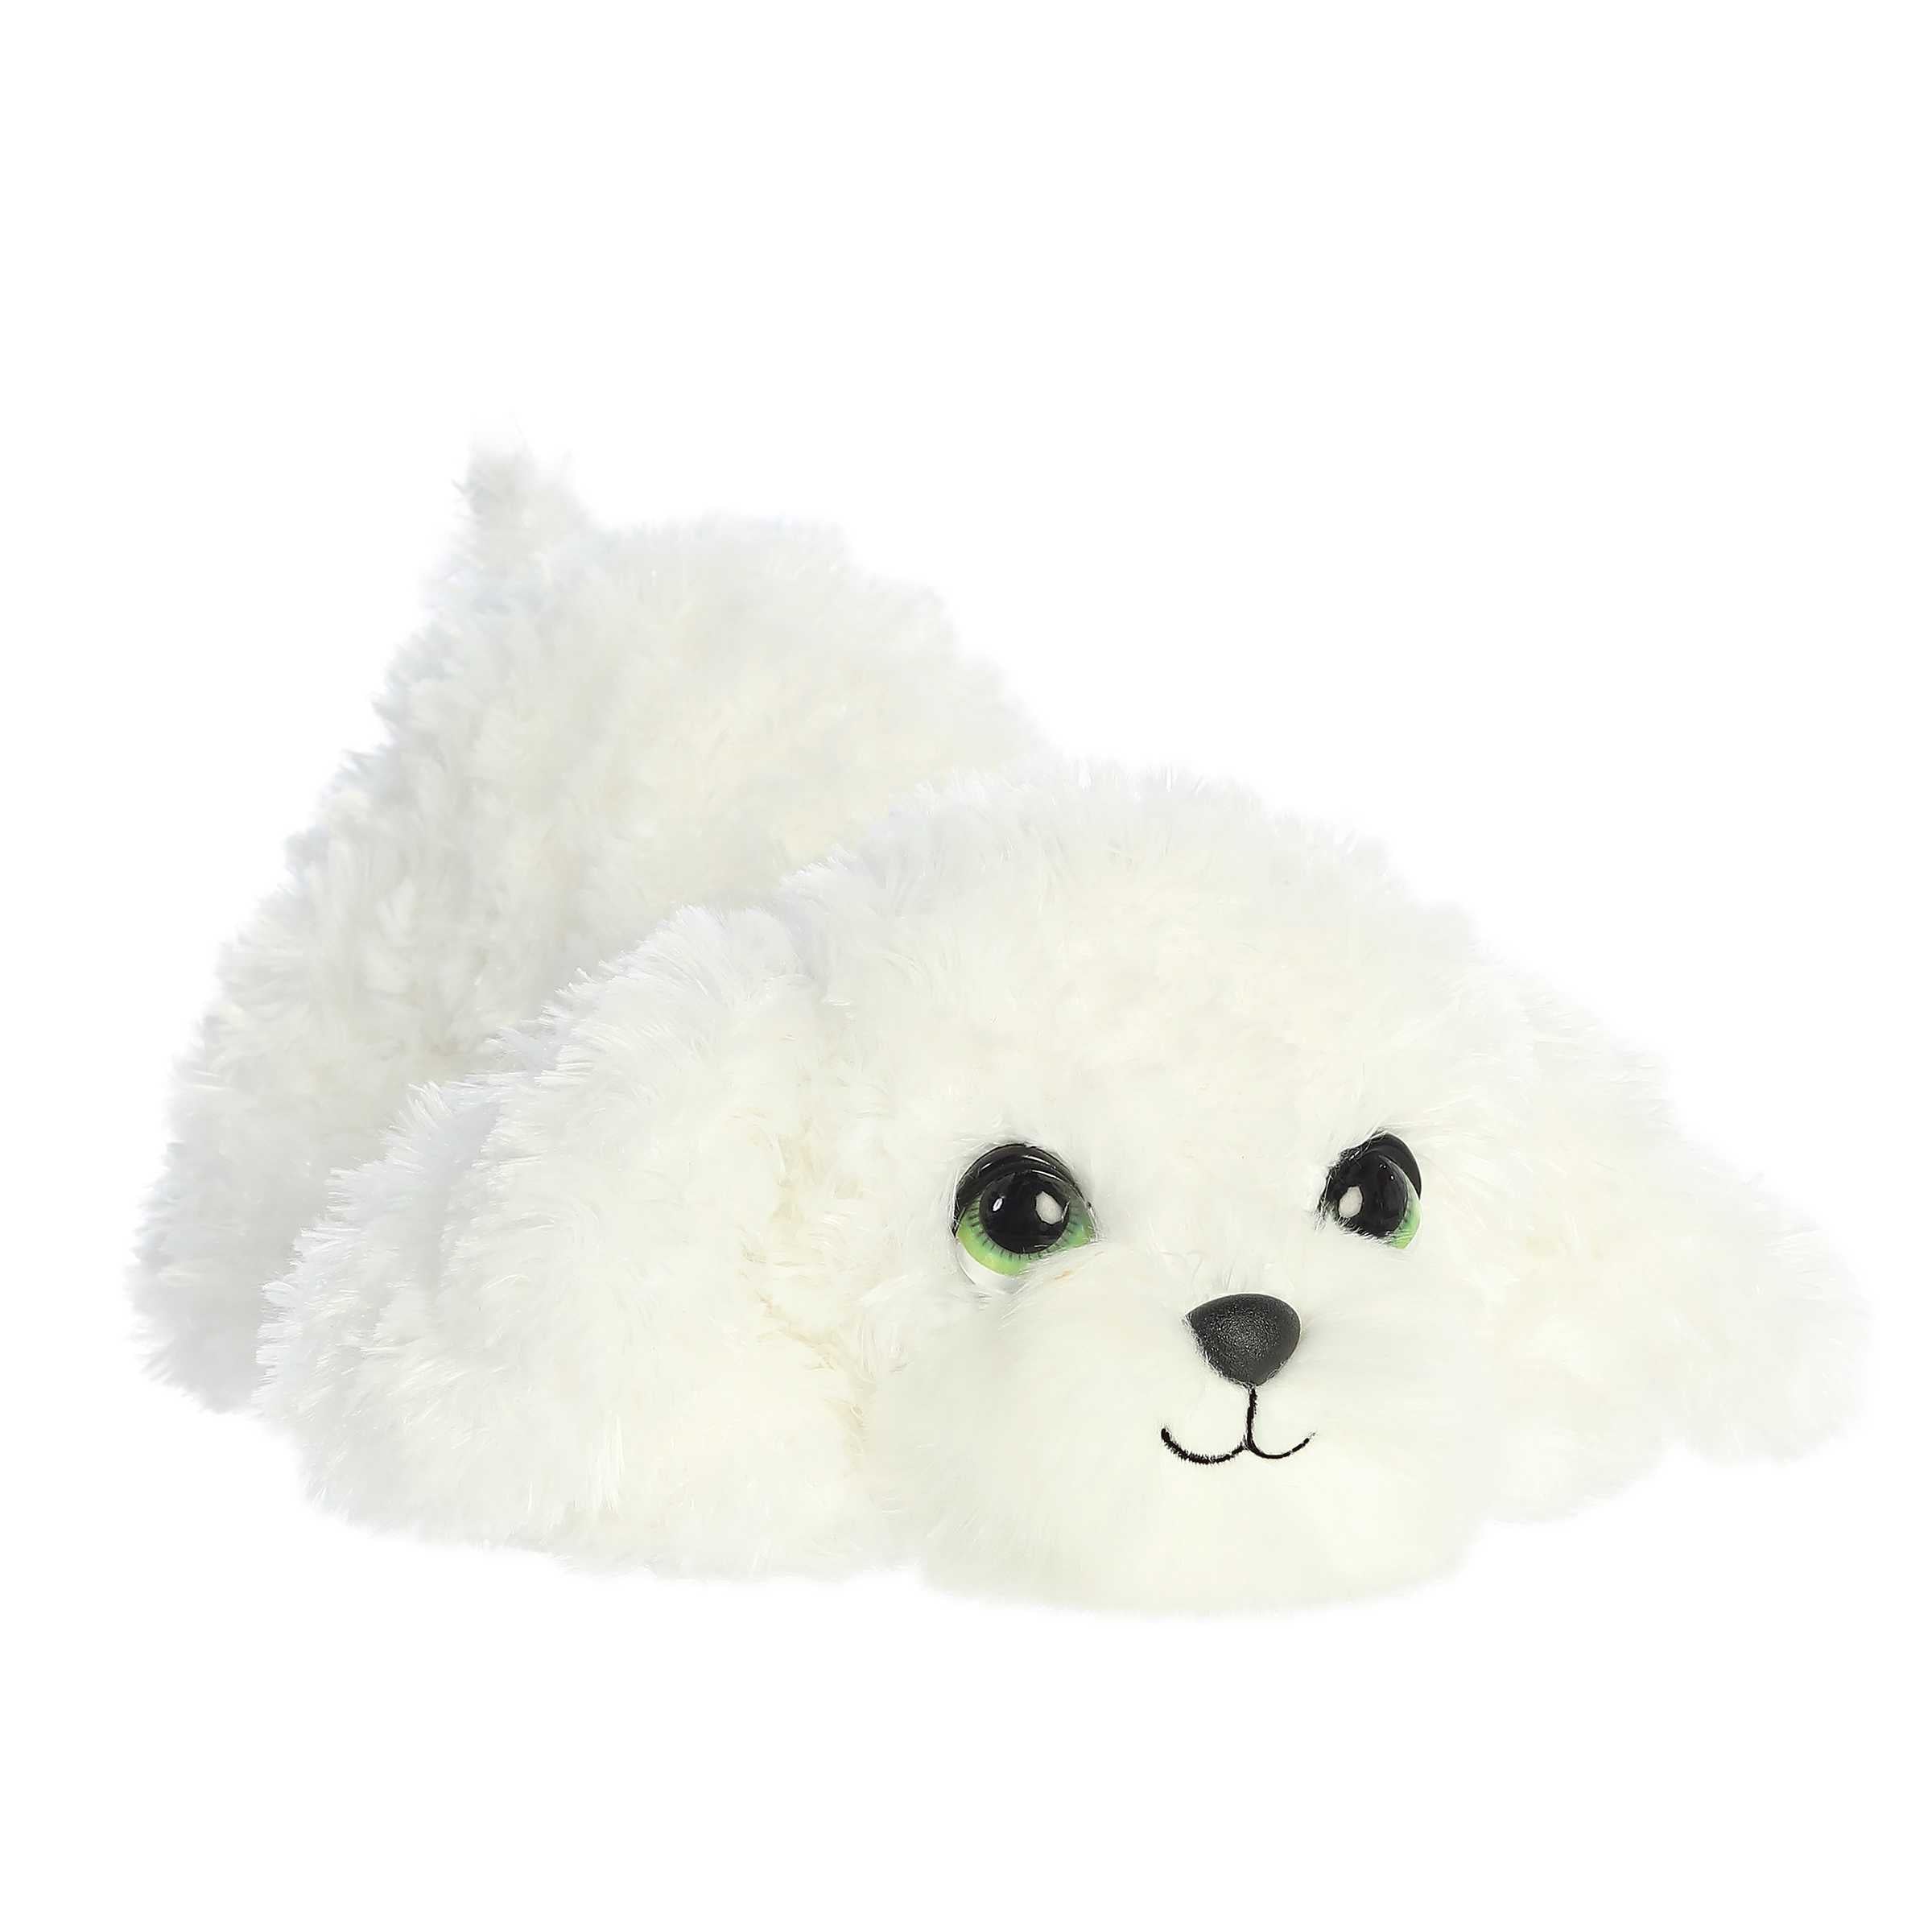 White Maltese plush in an active stance with big green eyes, offering a sweet, lifelike look for endless imaginative play.